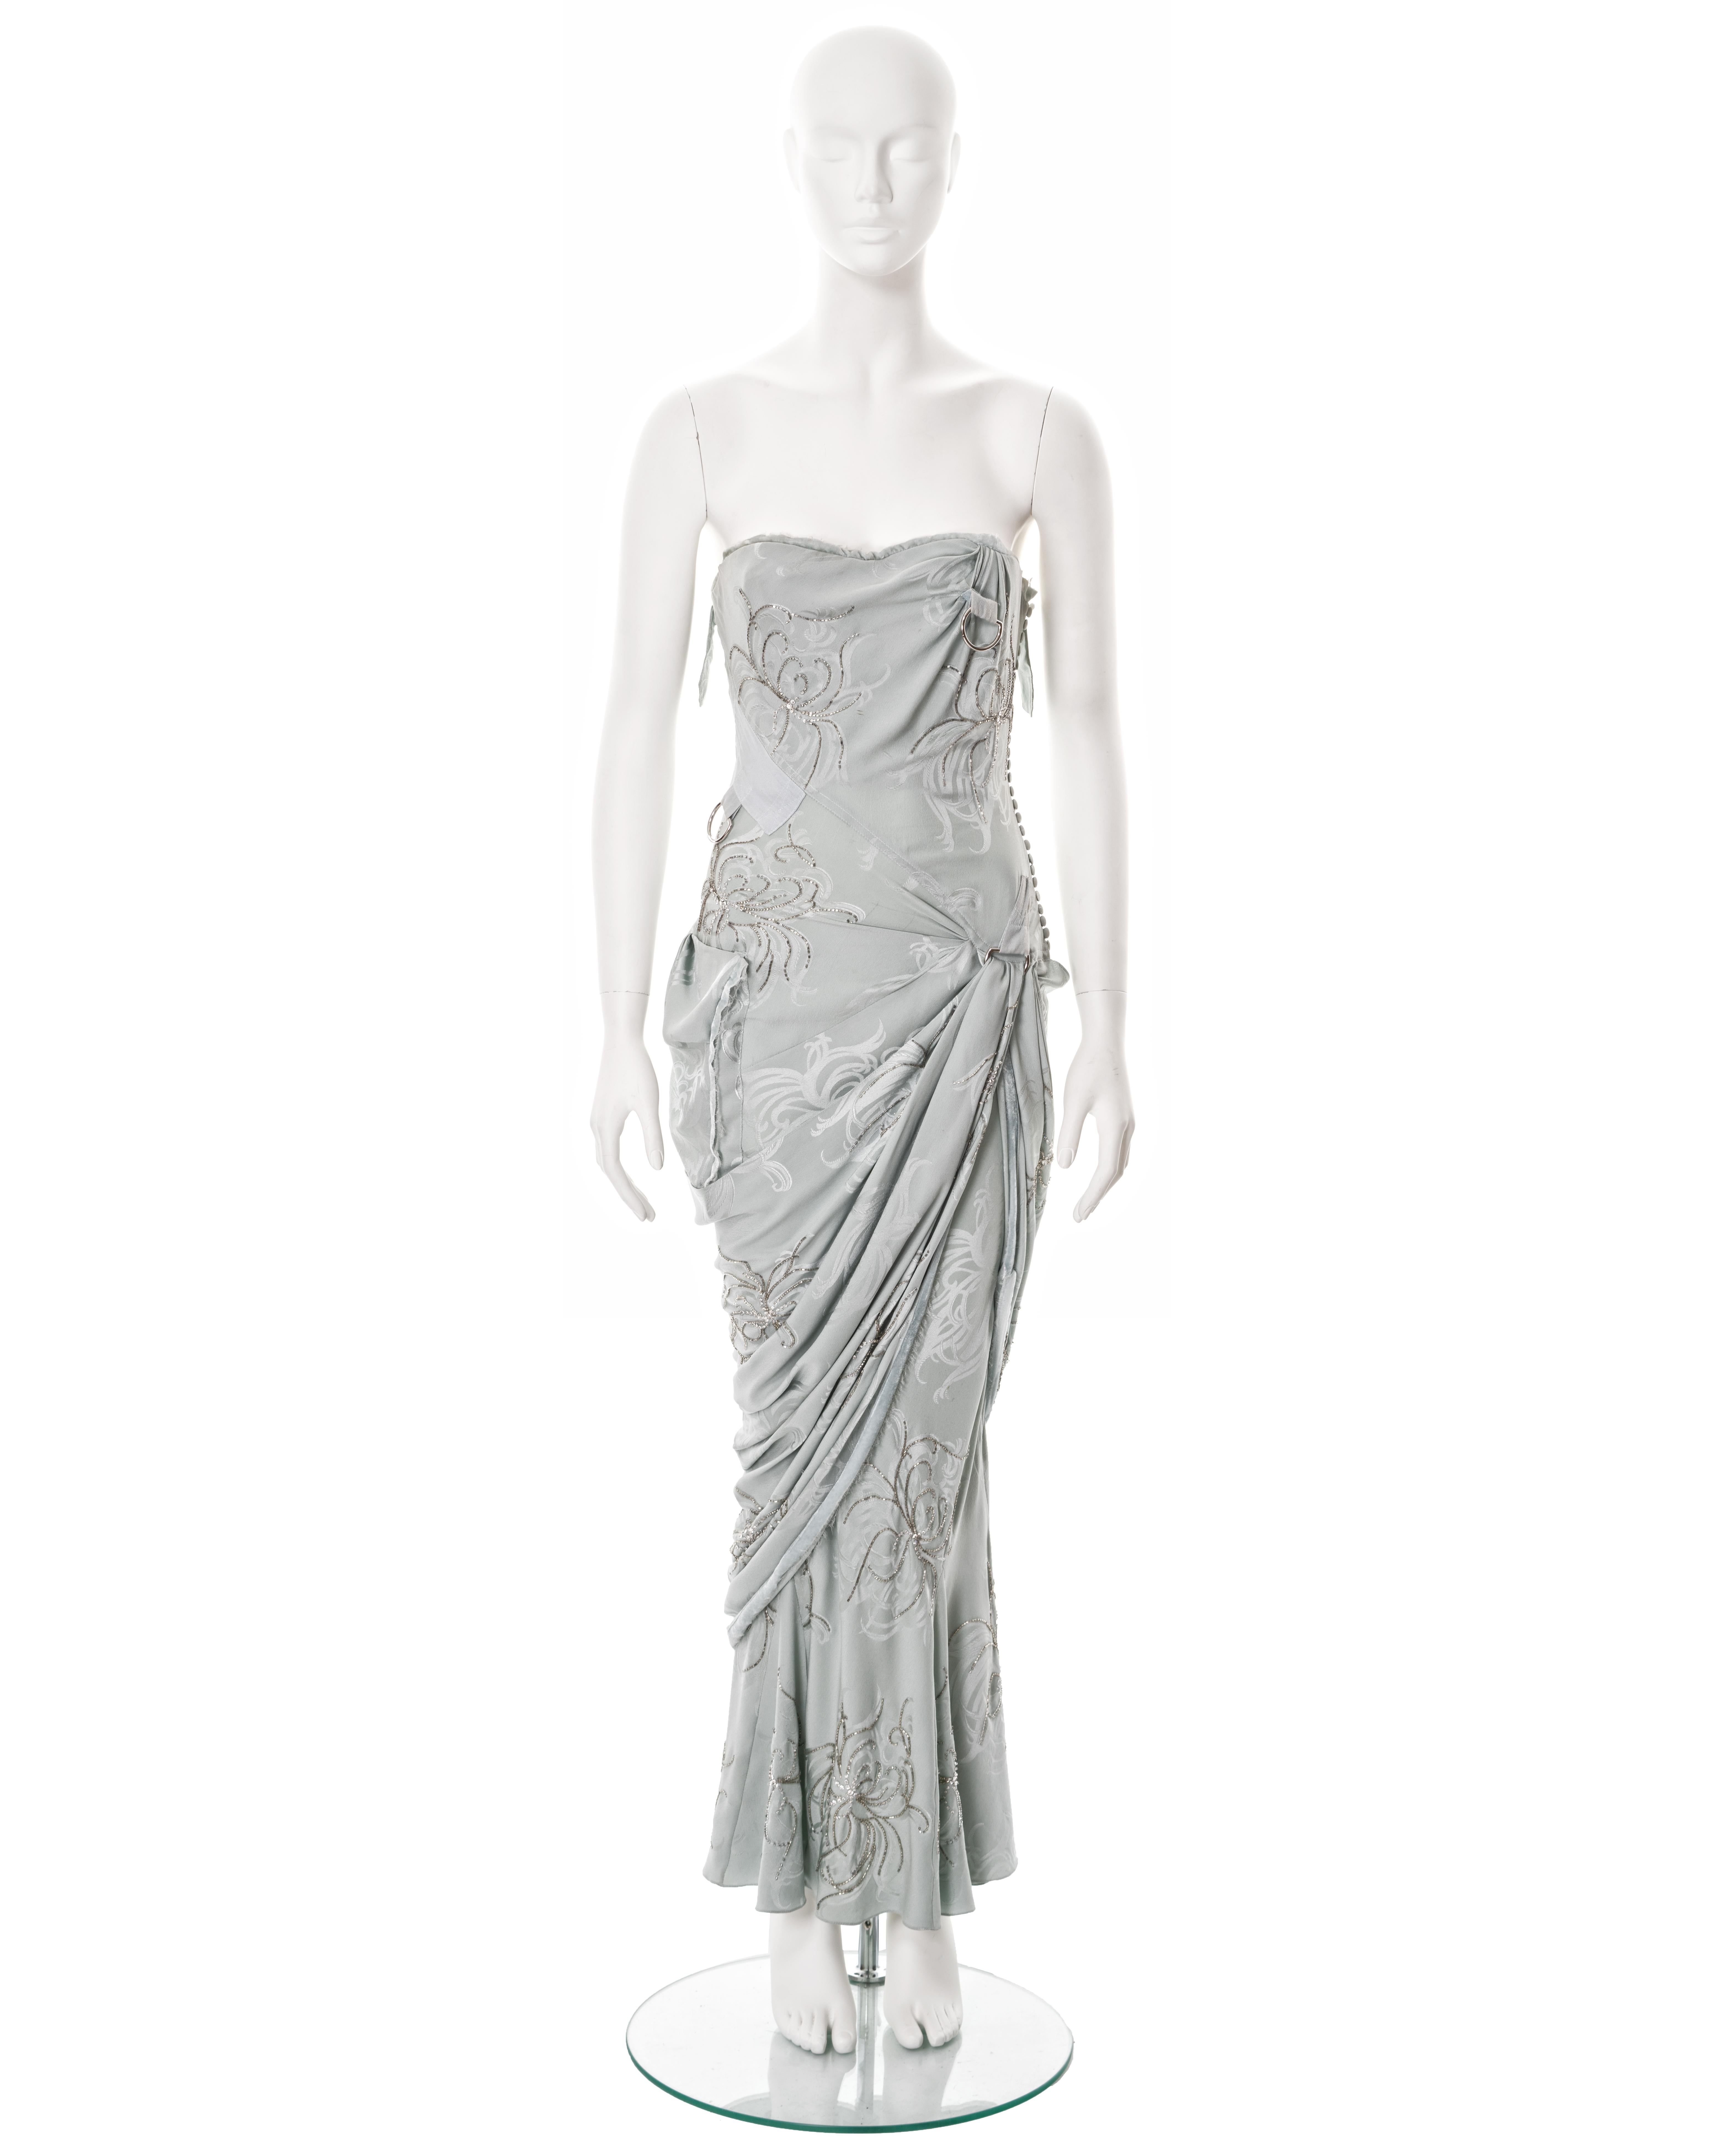 ▪ Christian Dior strapless evening dress
▪ Creative Director: John Galliano
▪ Sold by One of a Kind Archive
▪ Fall-Winter 2005 
▪ Constructed from a pale blue silk damask 
▪ Asymmetric drape skirt 
▪ Silver bugle bead embellishments 
▪ Velvet ribbon